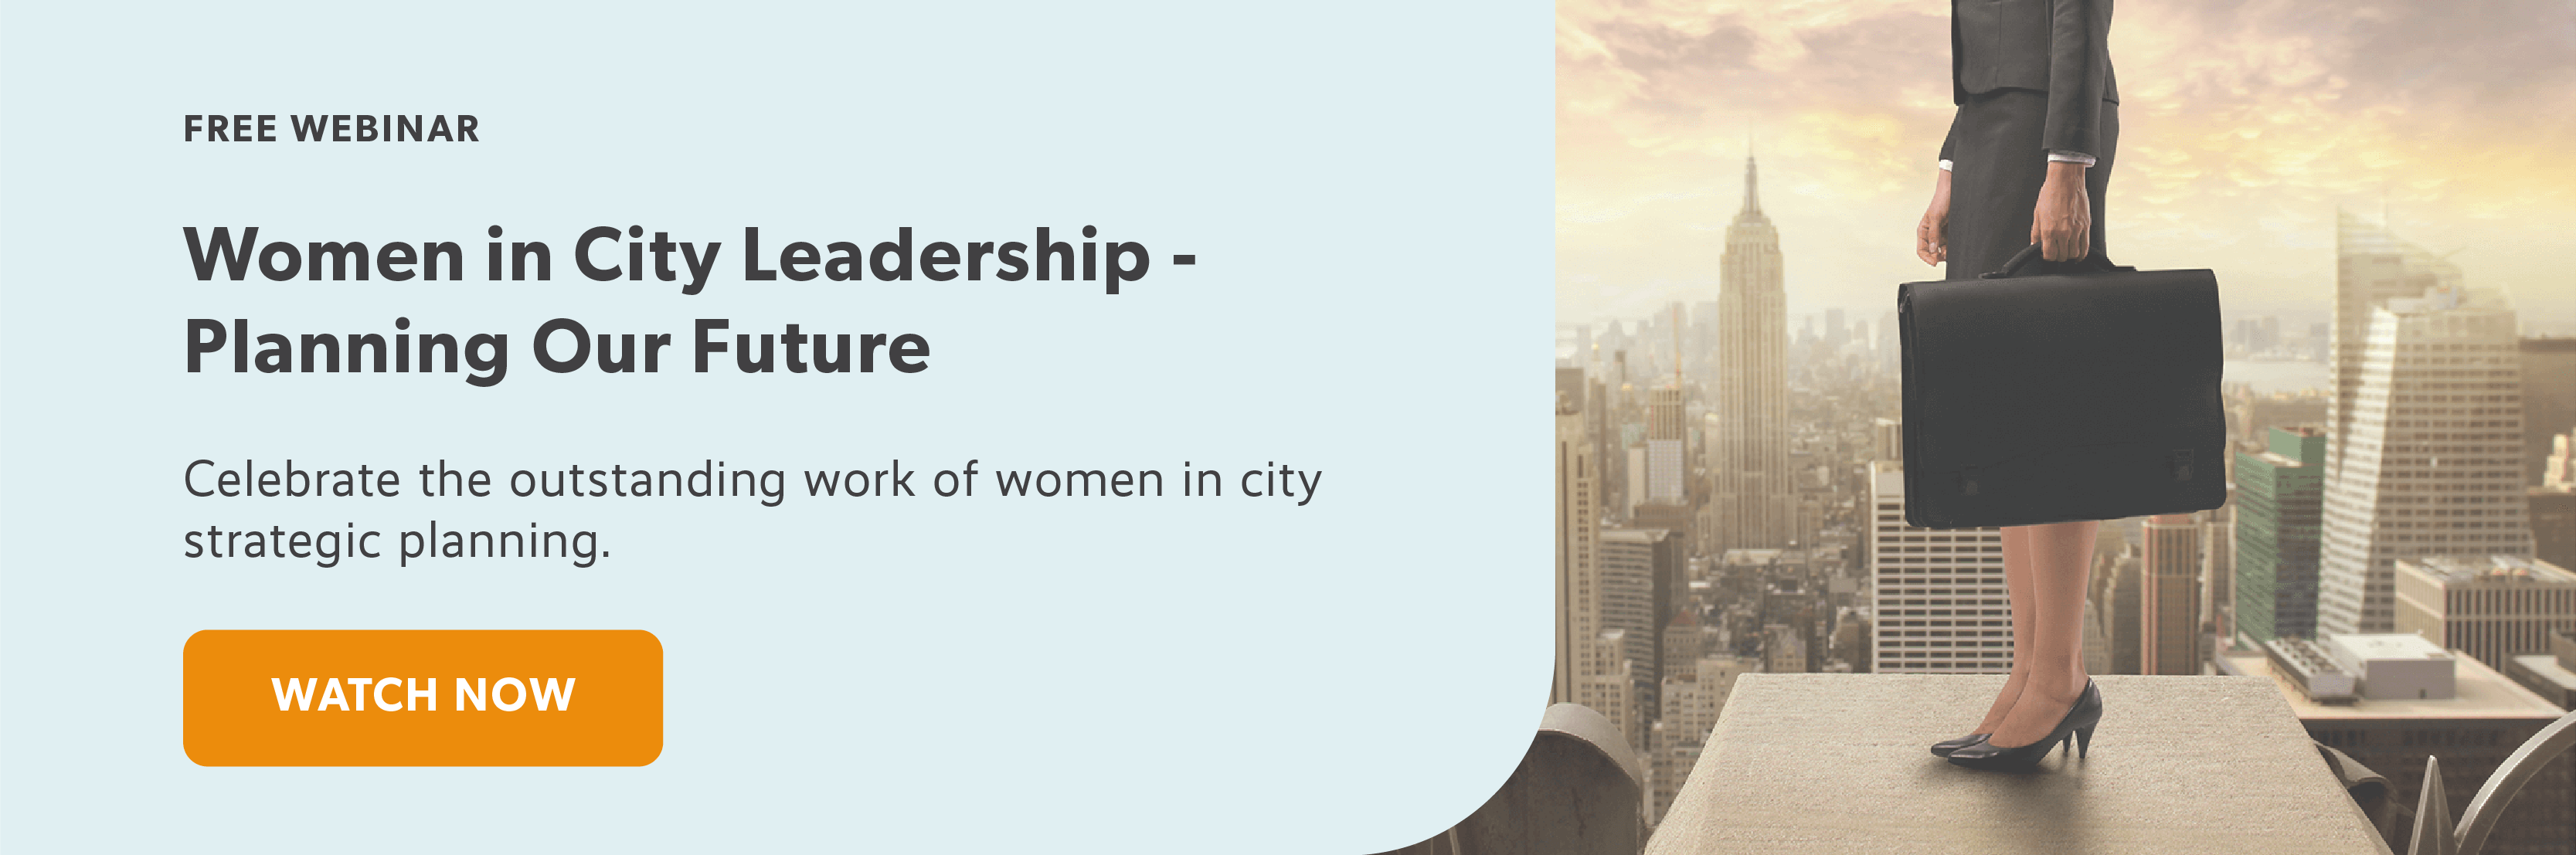 Women in City Leadership - Planning Our Future